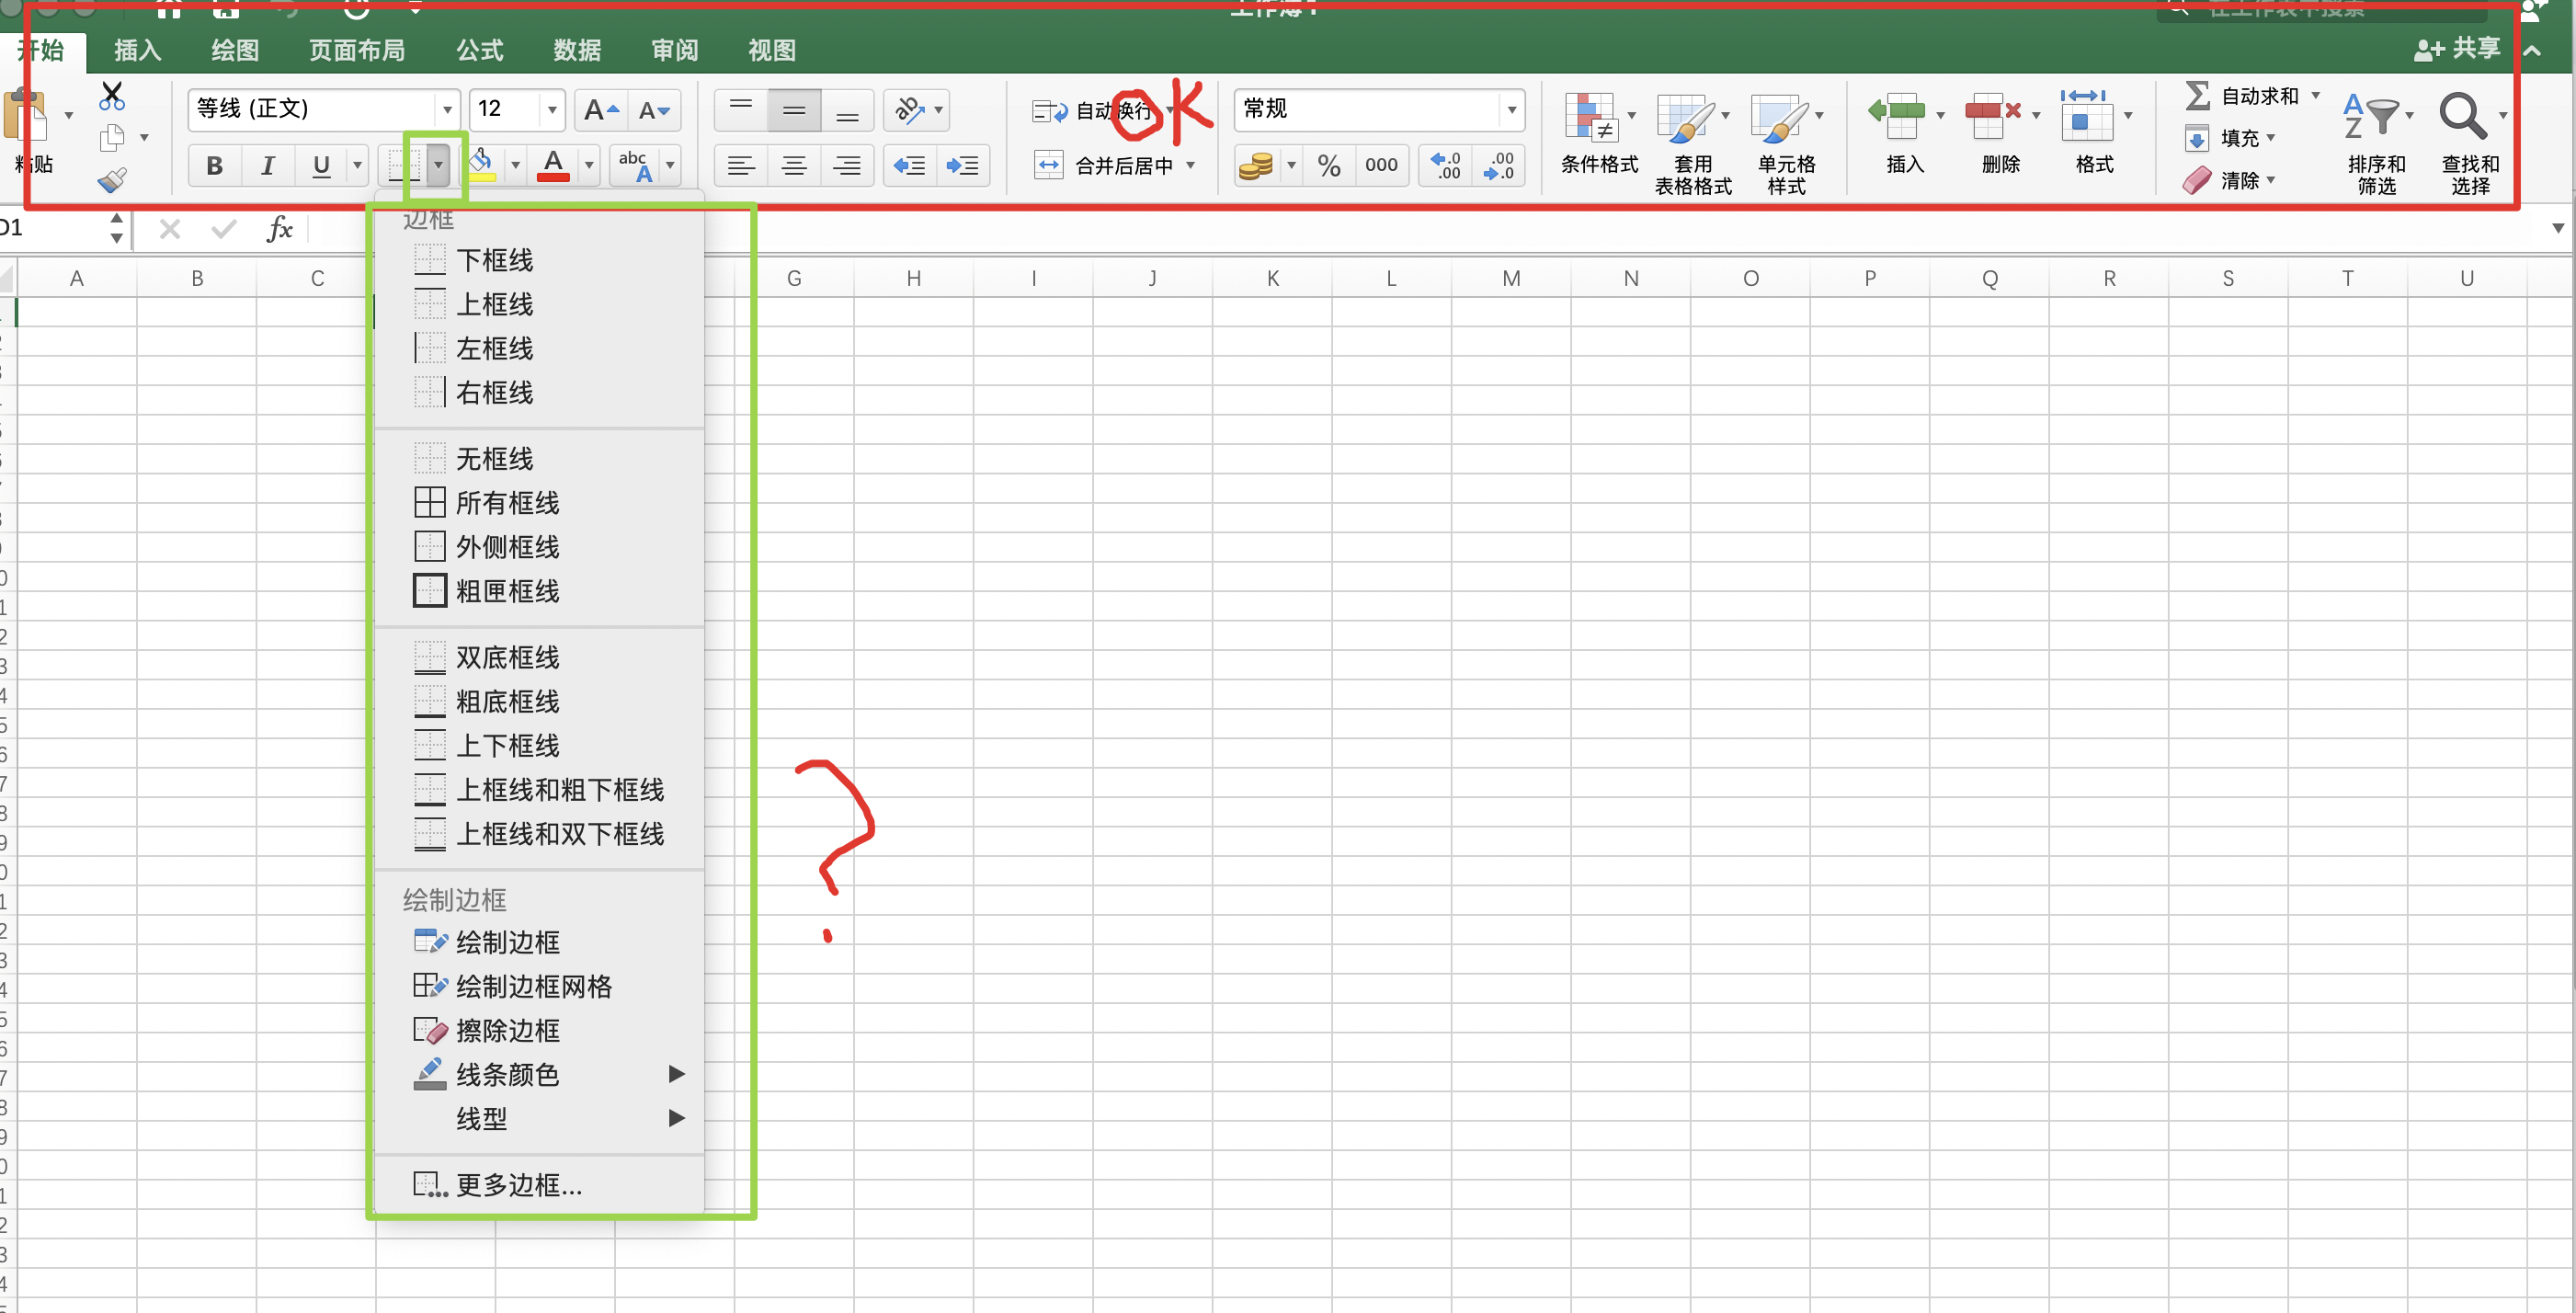 No response from the functions in the dropdown triangle of the office